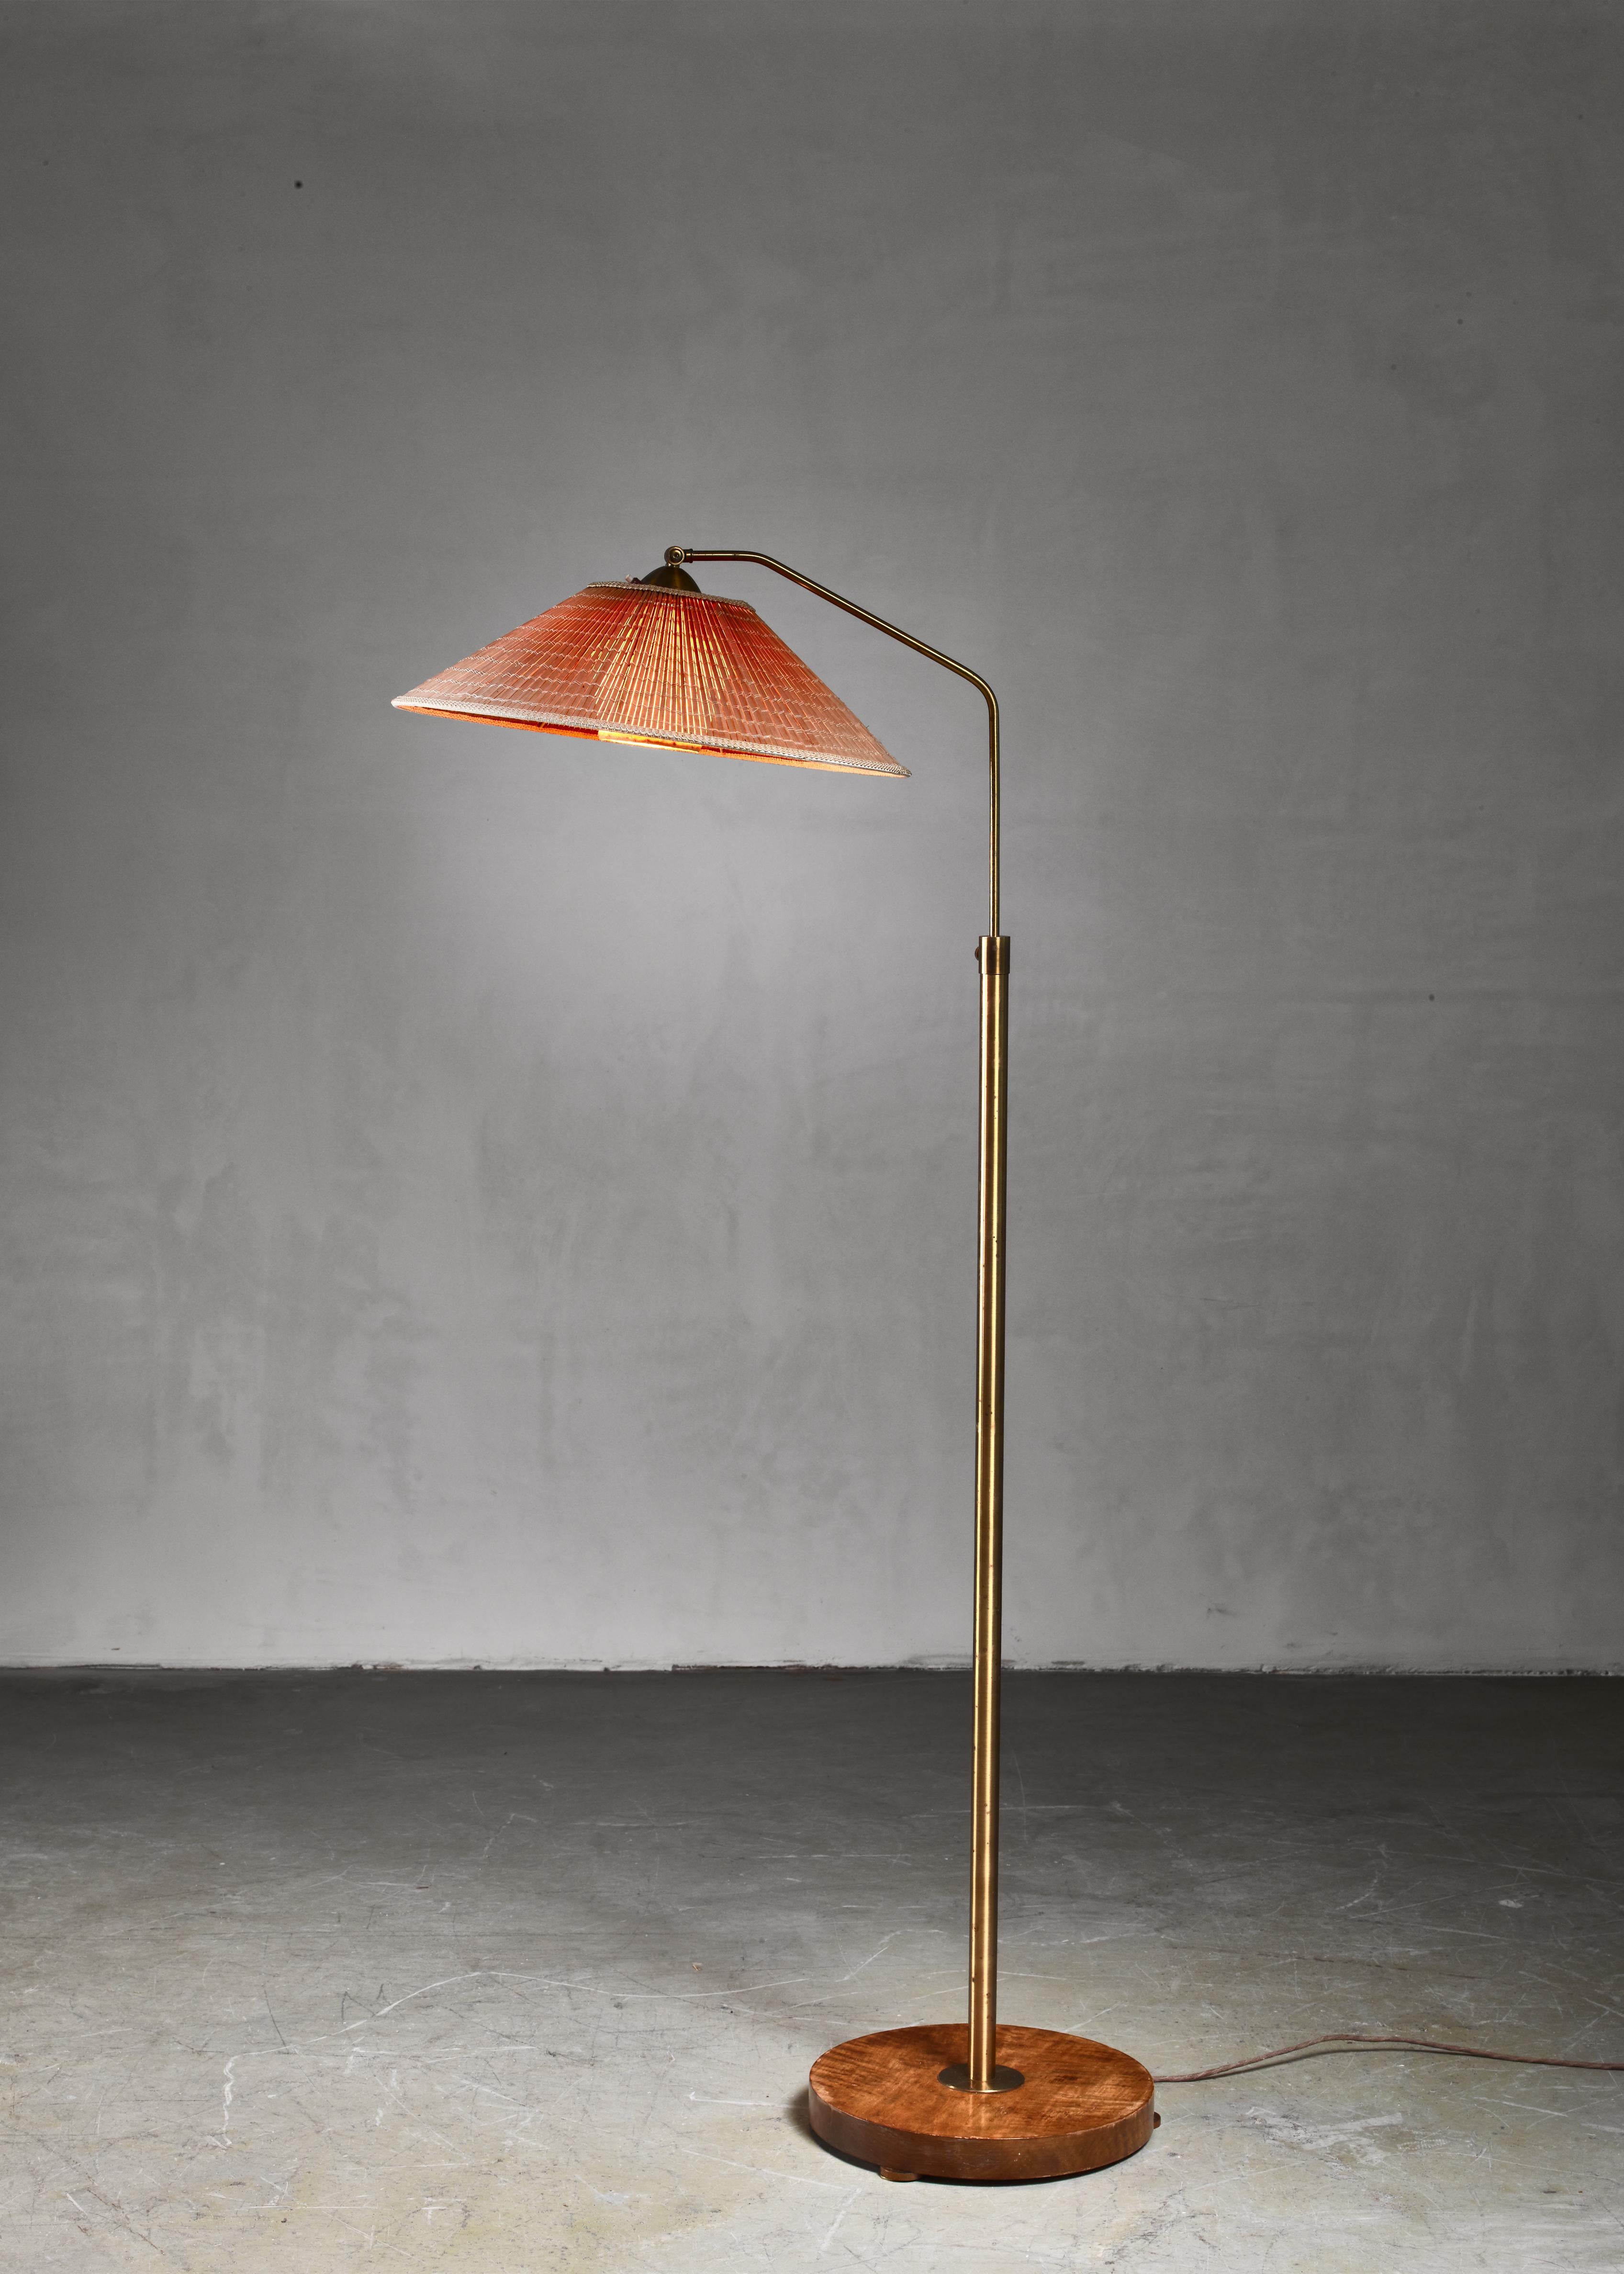 A height-adjustable Swedish floor lamp with an adjustable wood slat shade and a paper diffuser. The lamp has a brass stem and stands on a round root wood foot.

The height can be adjusted between 136 and 193 cm.